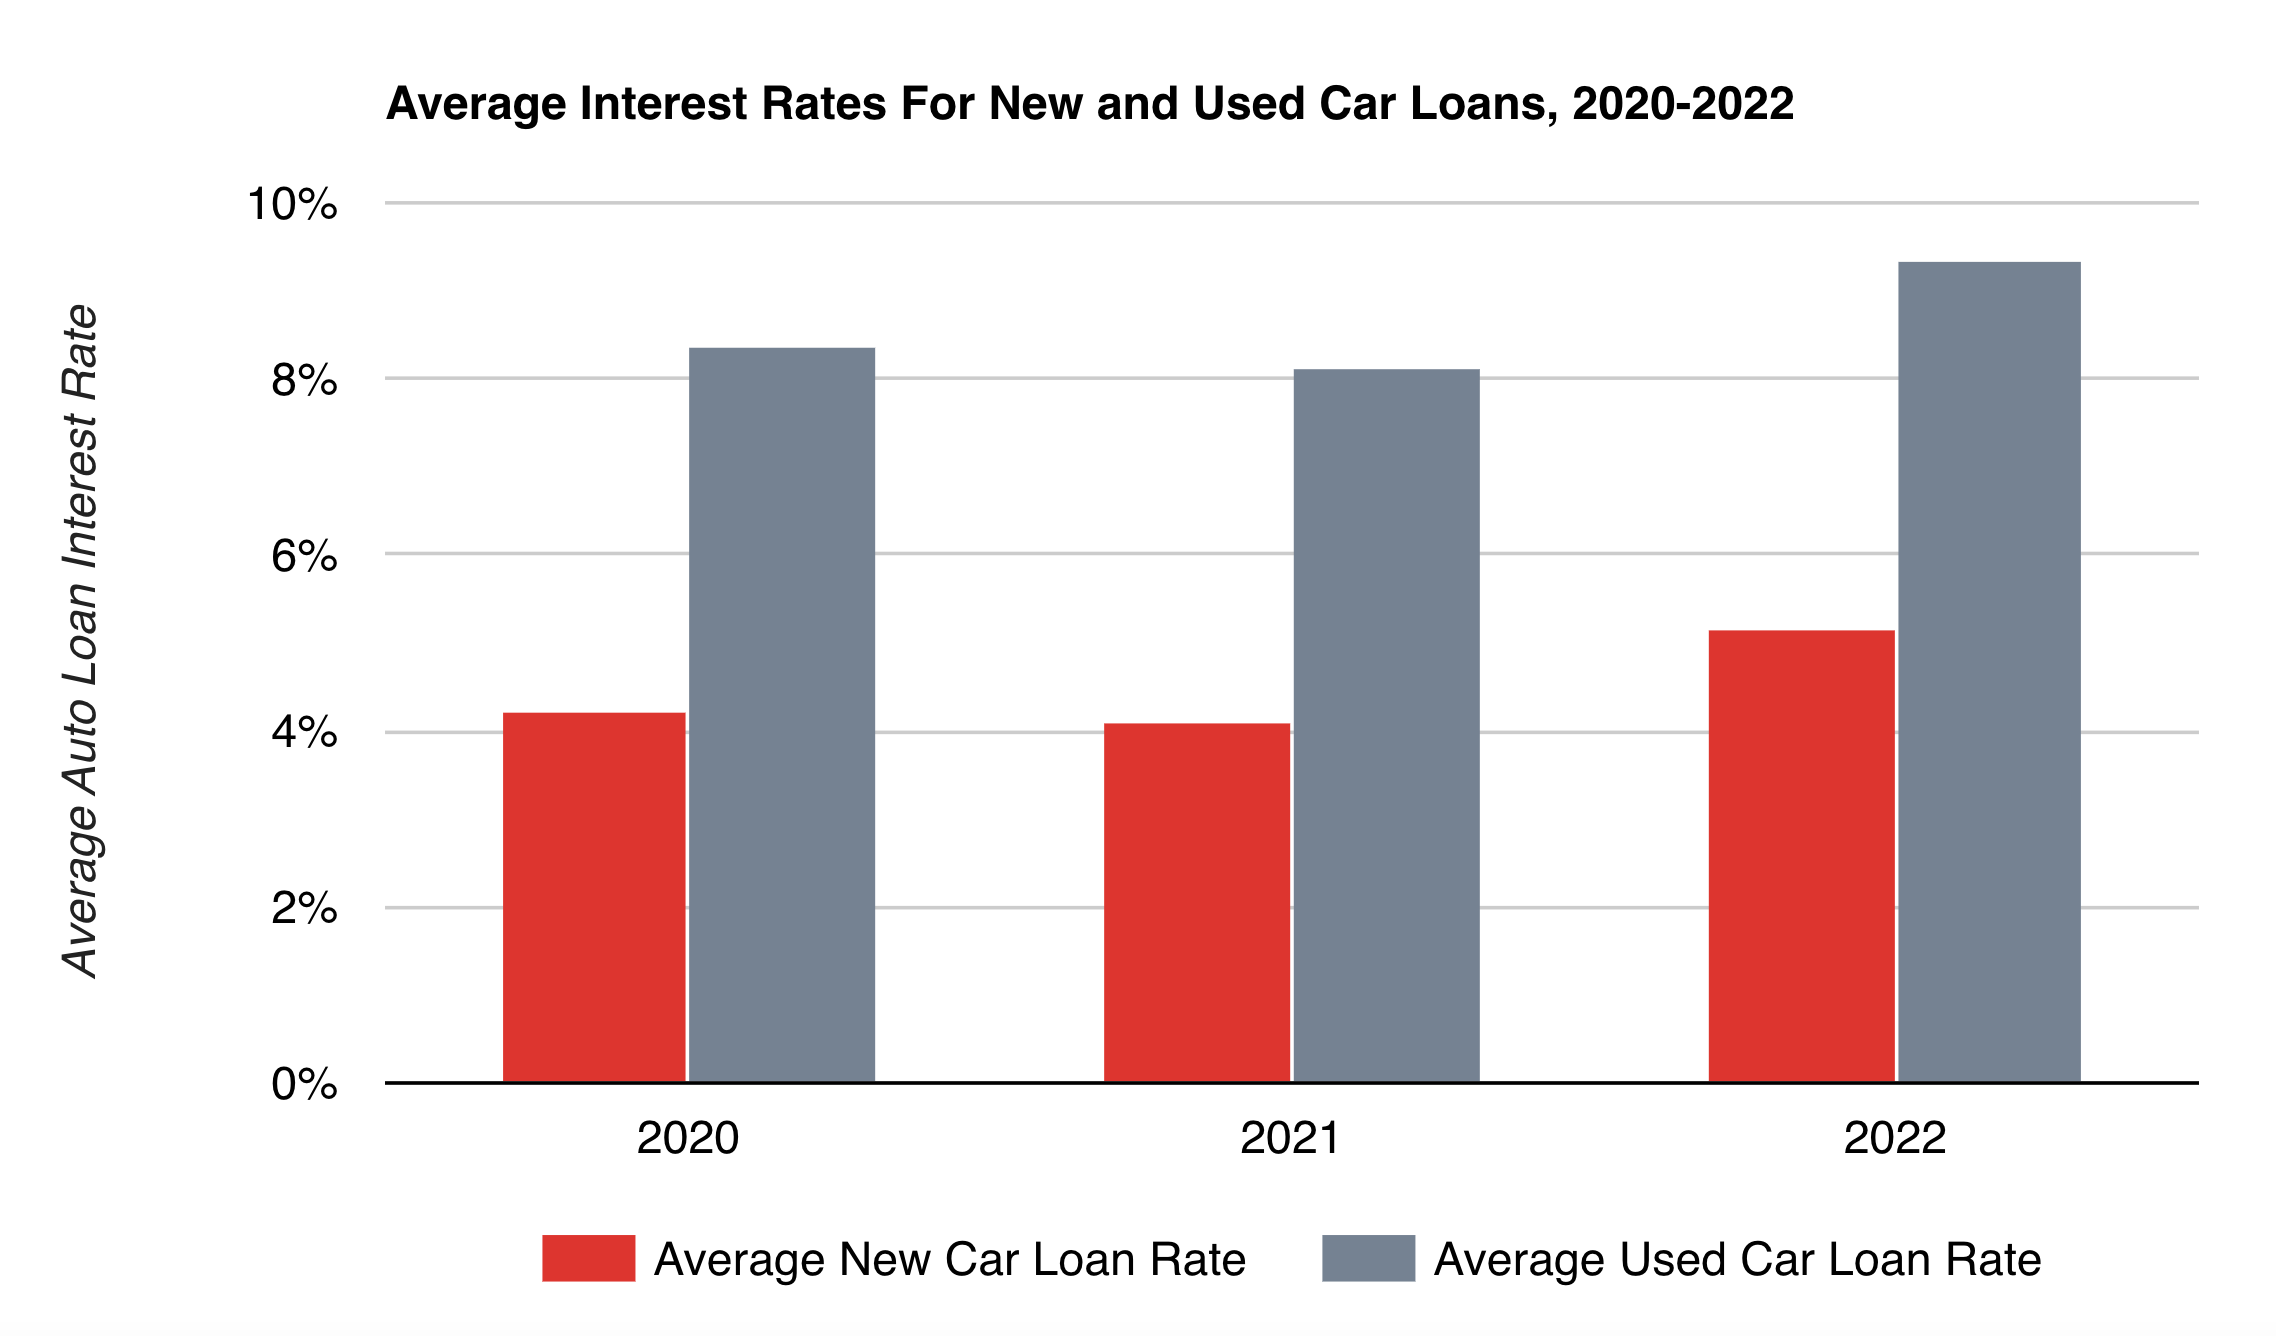 Bar chart of average interest rates for new and used car loans from 2020 to 2022.